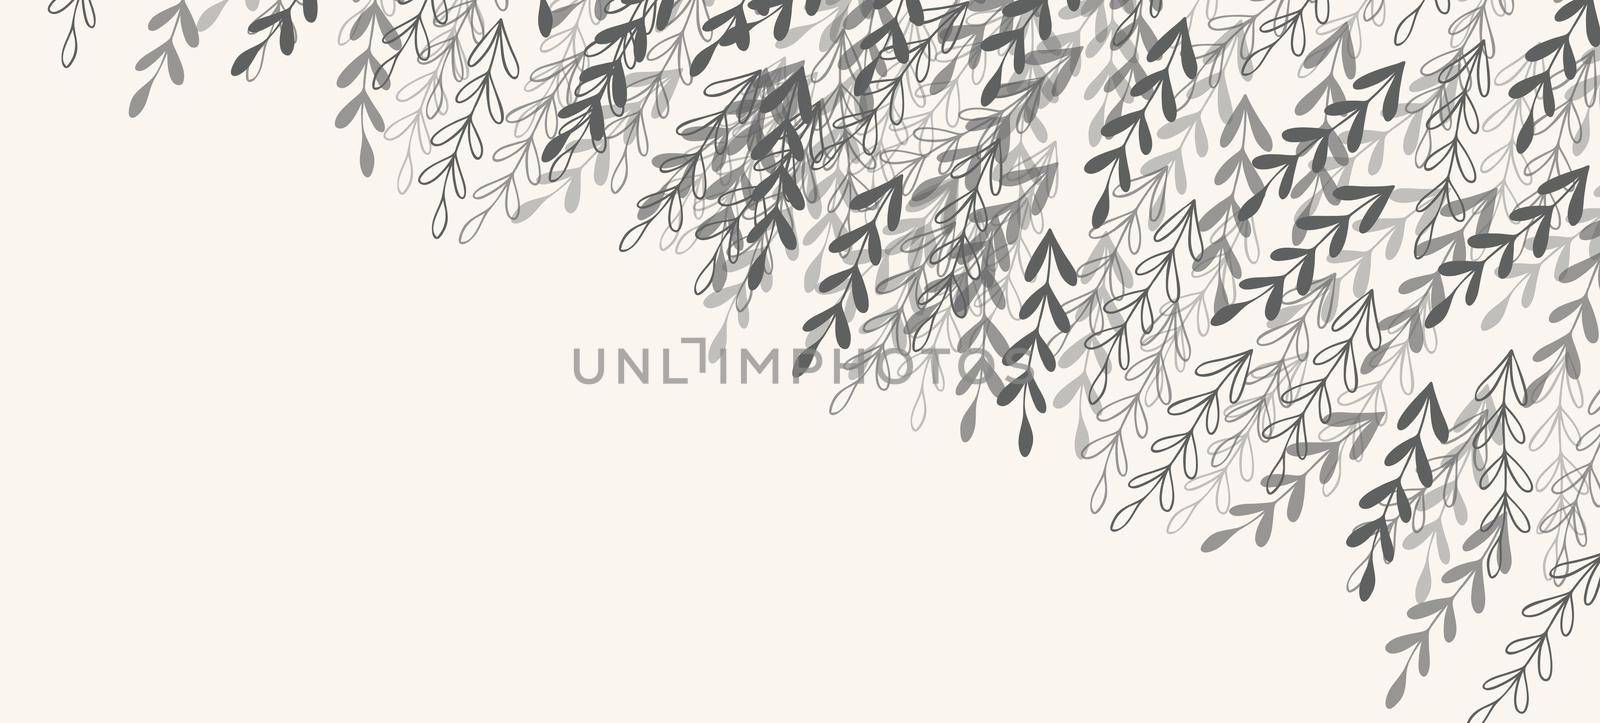 Floral web banner with drawn grey exotic leaves. Nature concept design. Modern floral compositions with summer branches. Vector illustration on the theme of ecology, natura, environment.